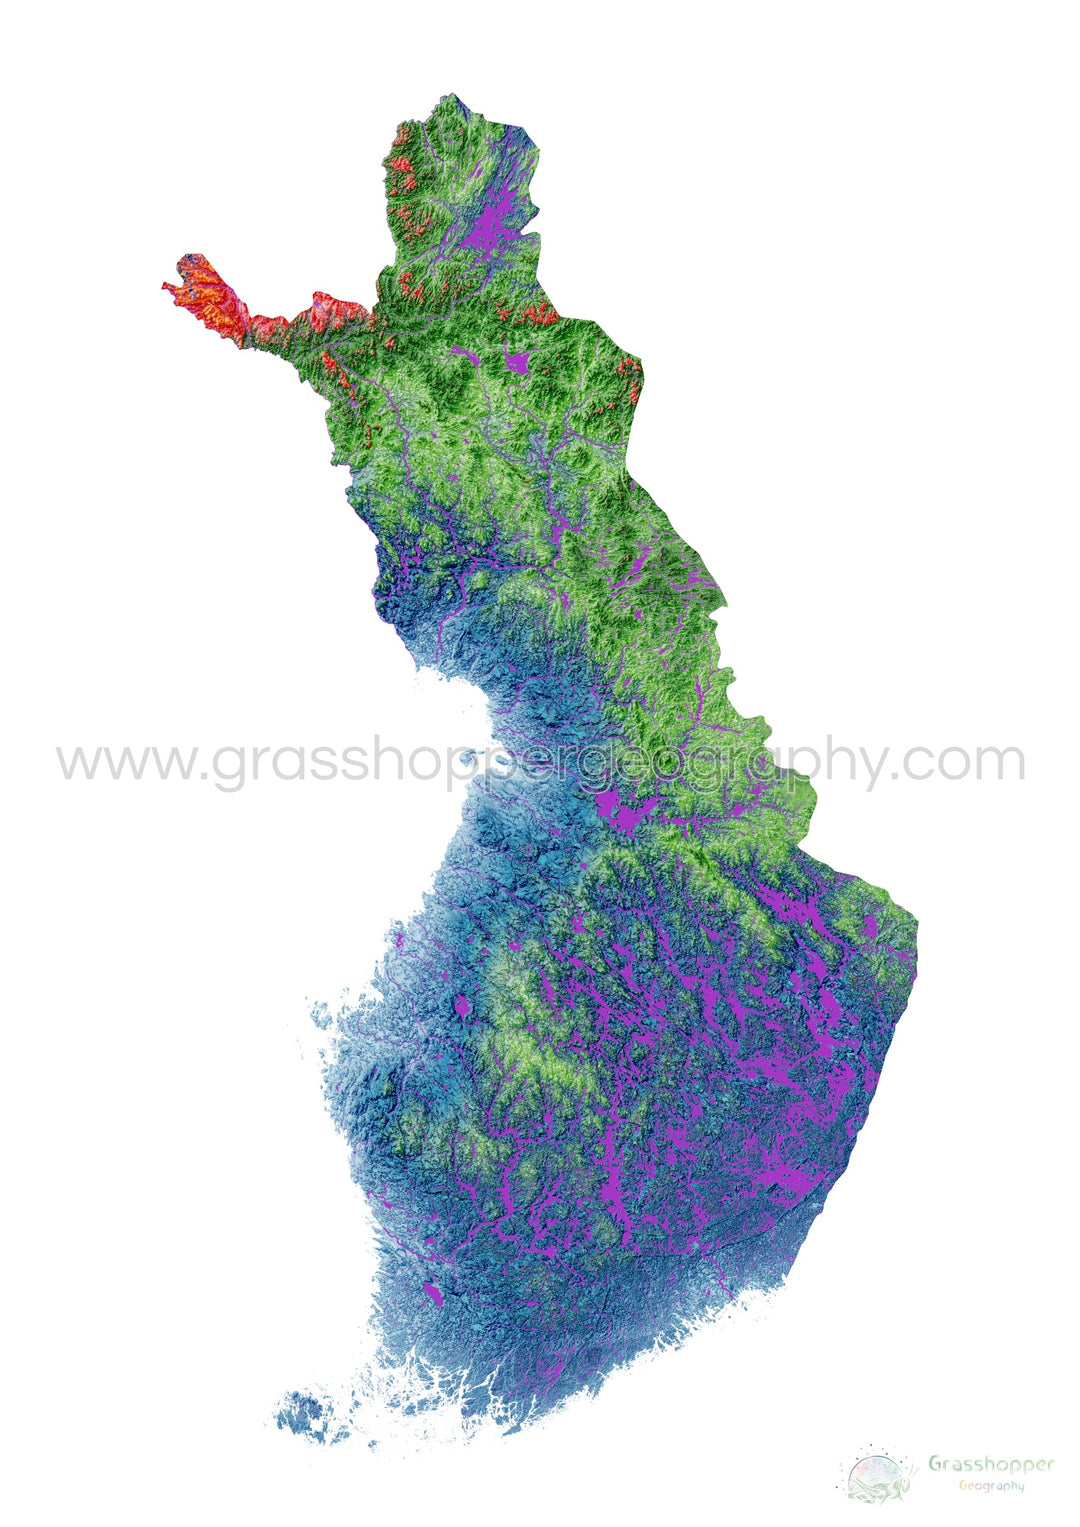 Elevation map of Finland with white background - Fine Art Print